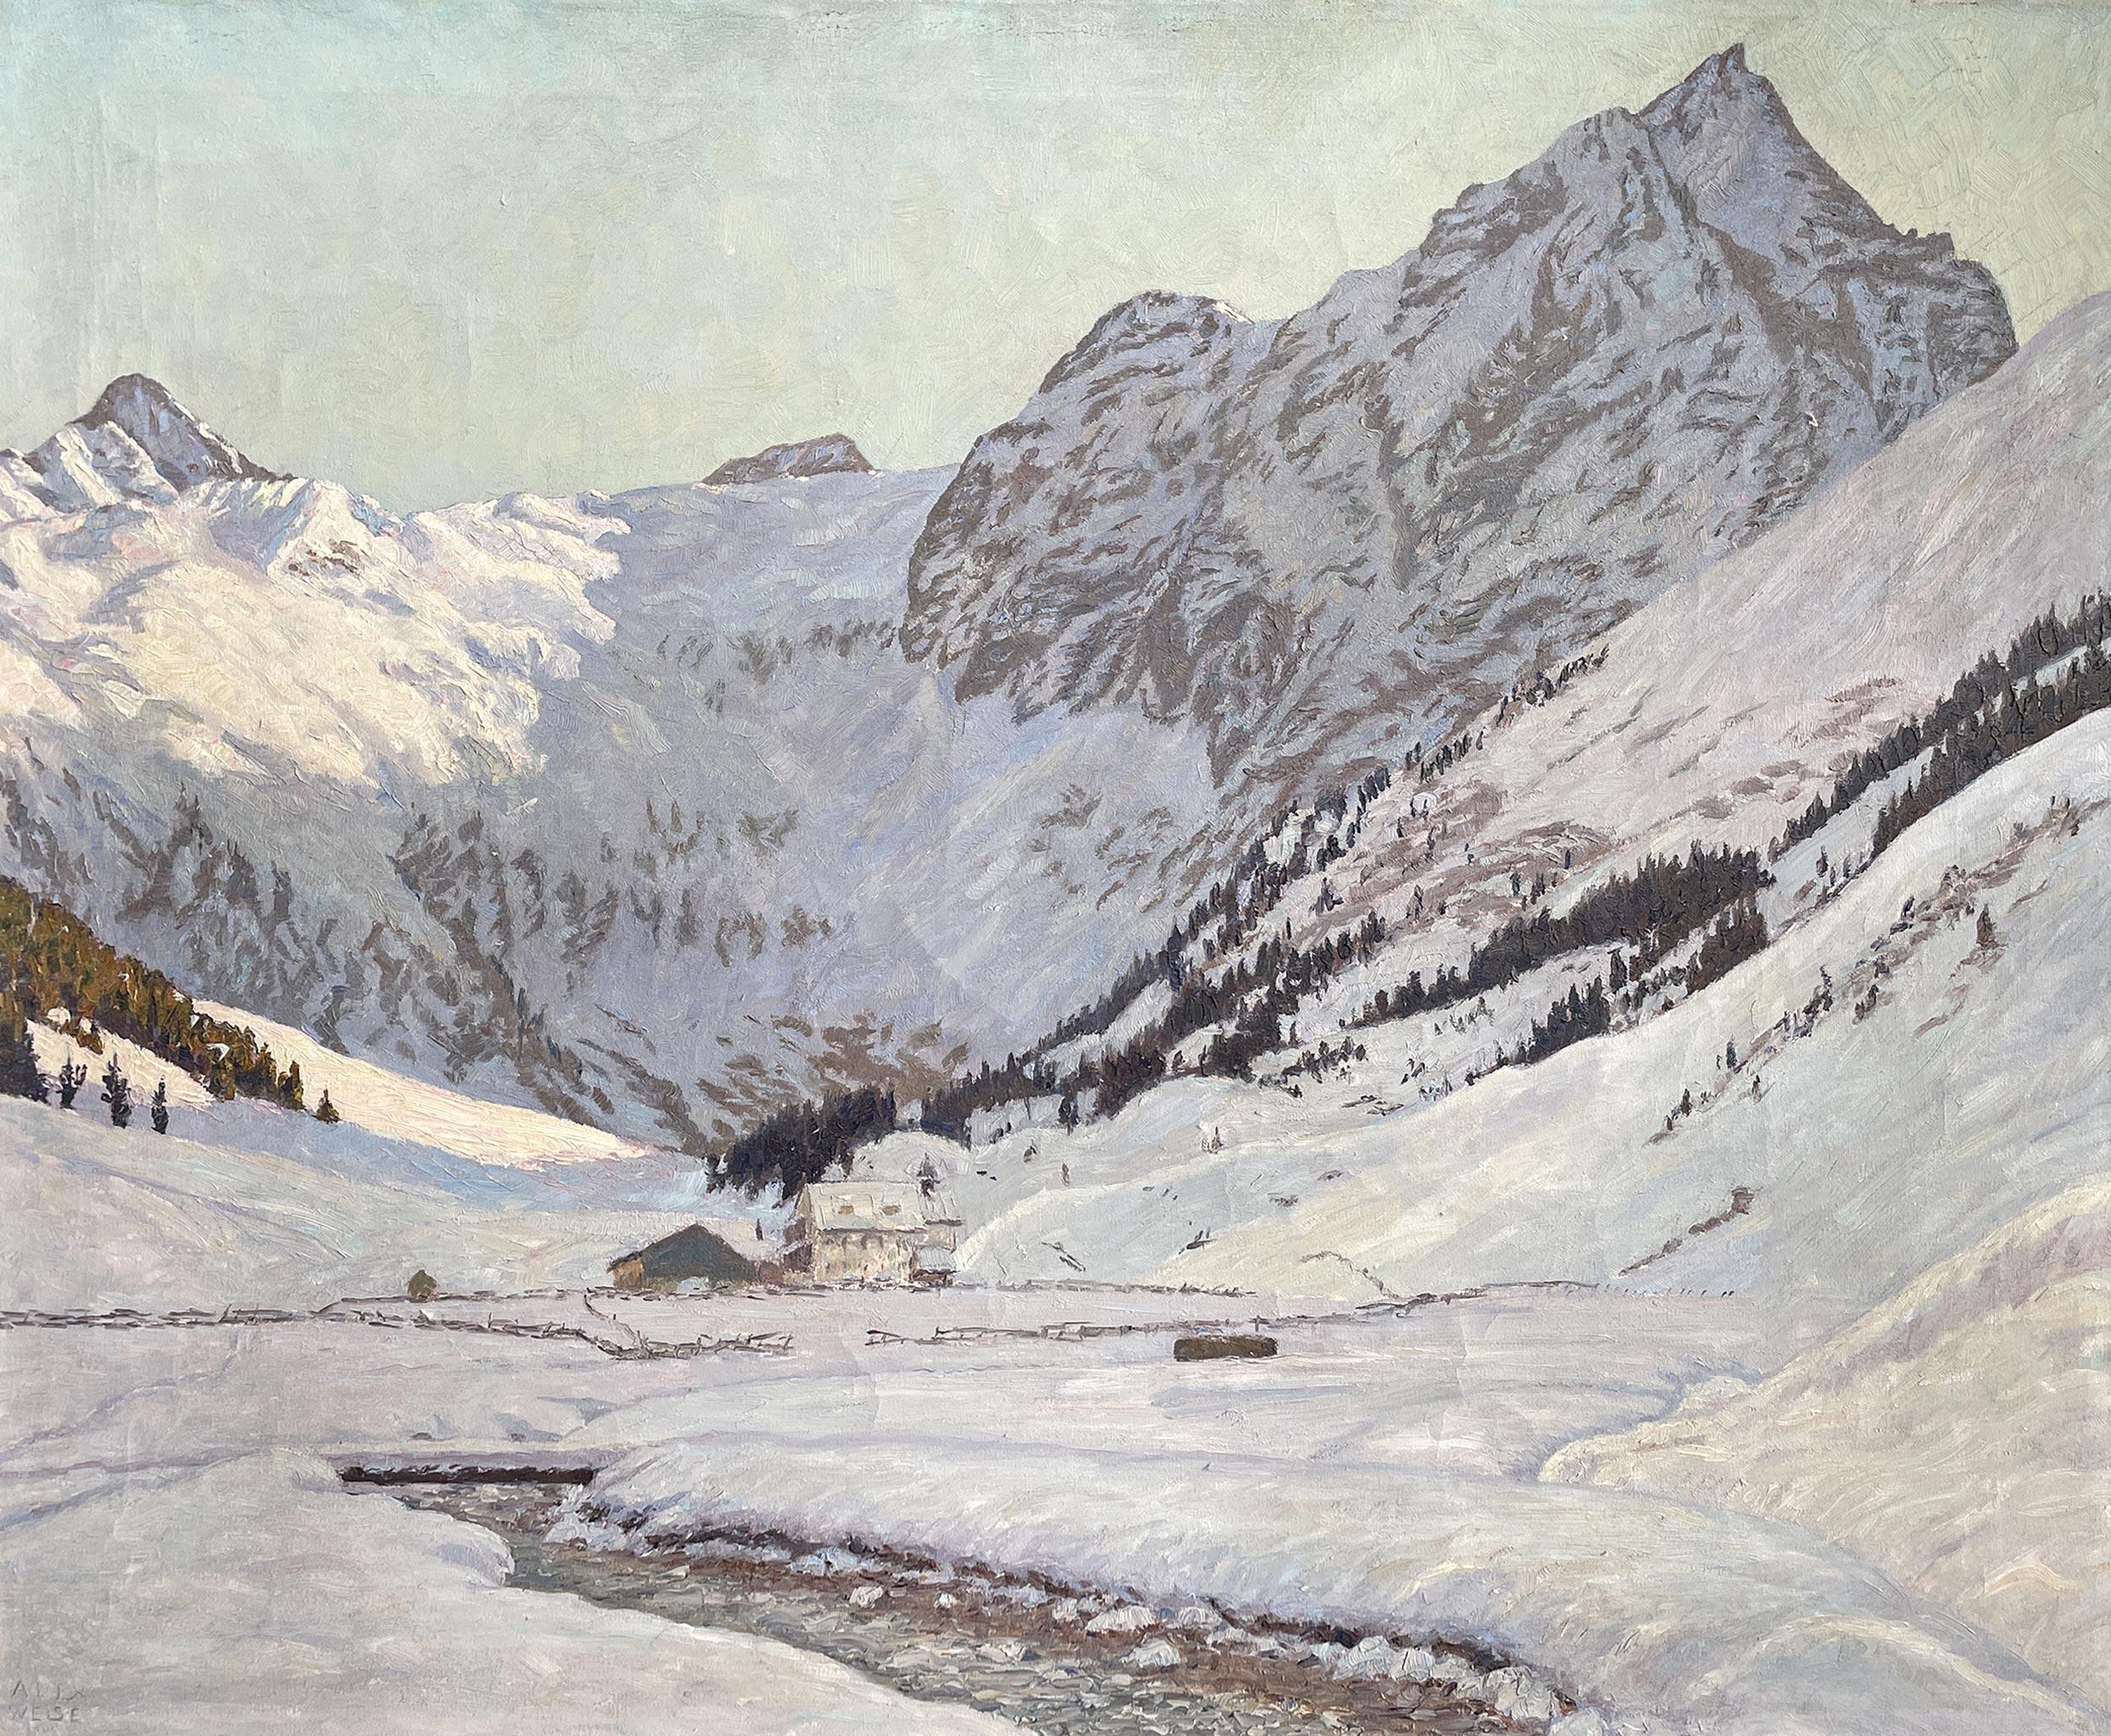 Snowy Landscape Oil On Canvas by Alex Weise - Dolomites 1930 For Sale 11